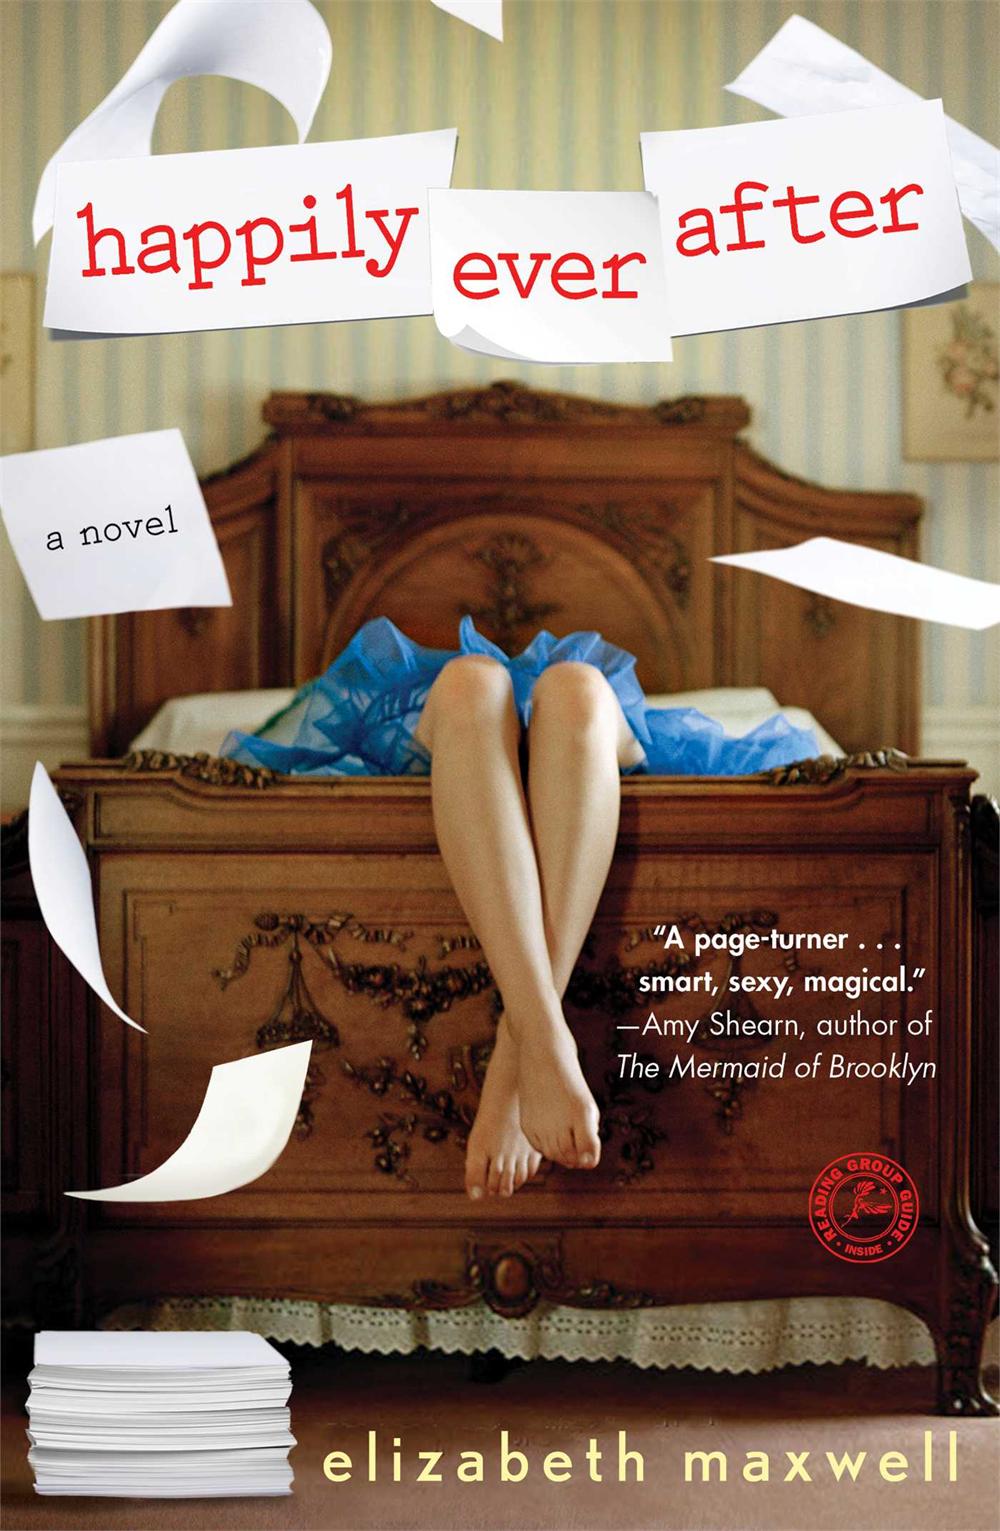 happily ever after elizabeth maxwell